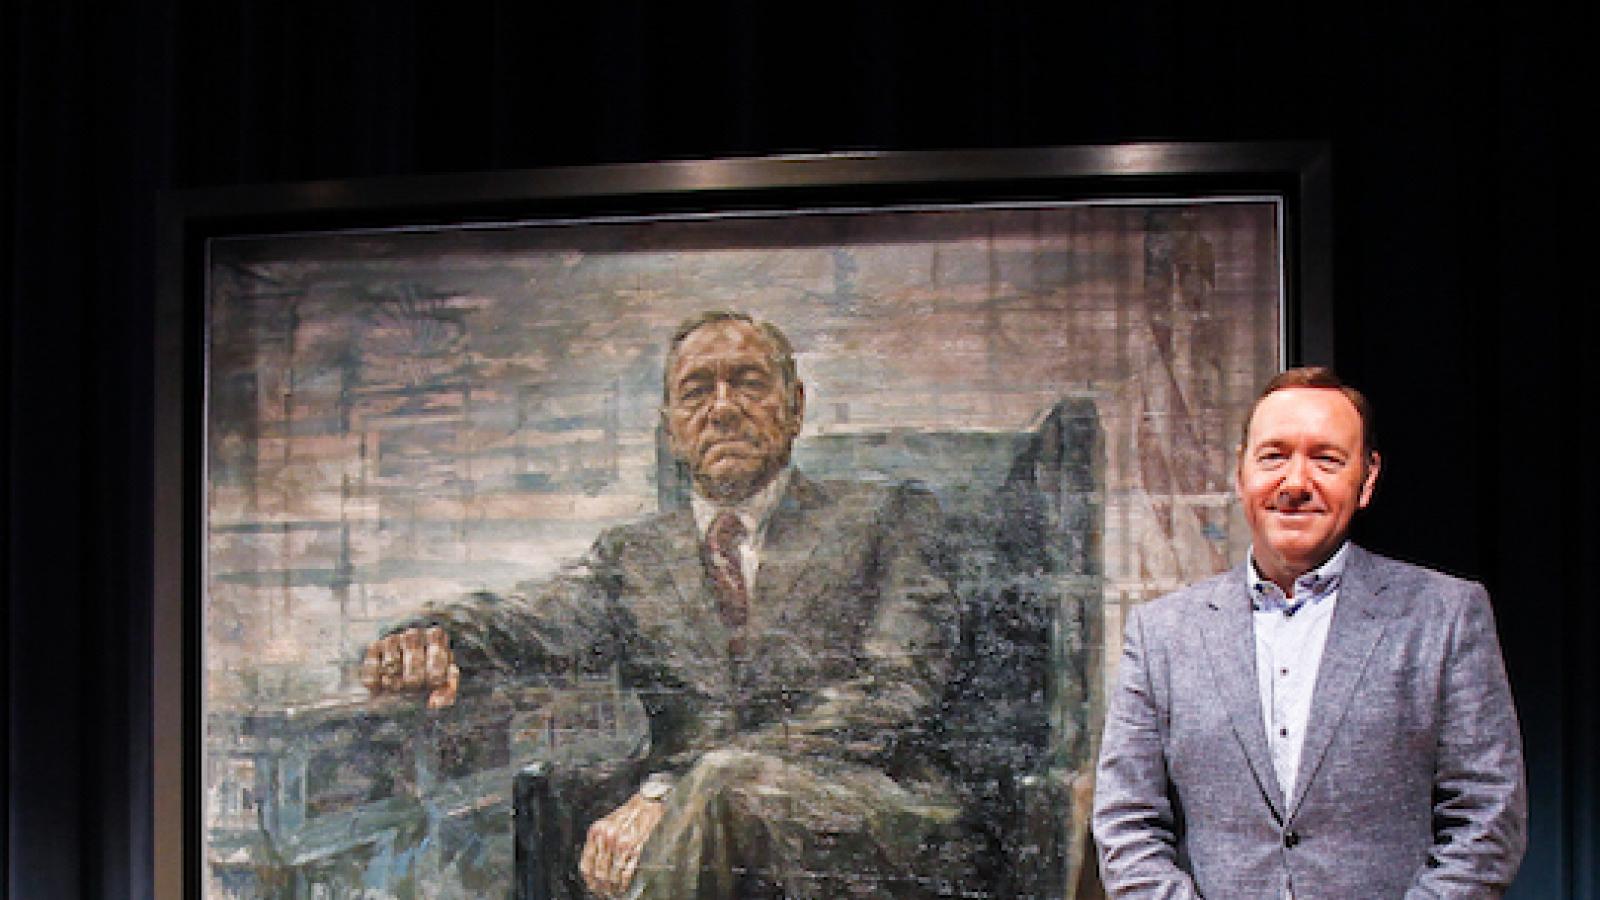 Actor Kevin Spacey stands next to a portrait of himself as TV character Frank Underwood